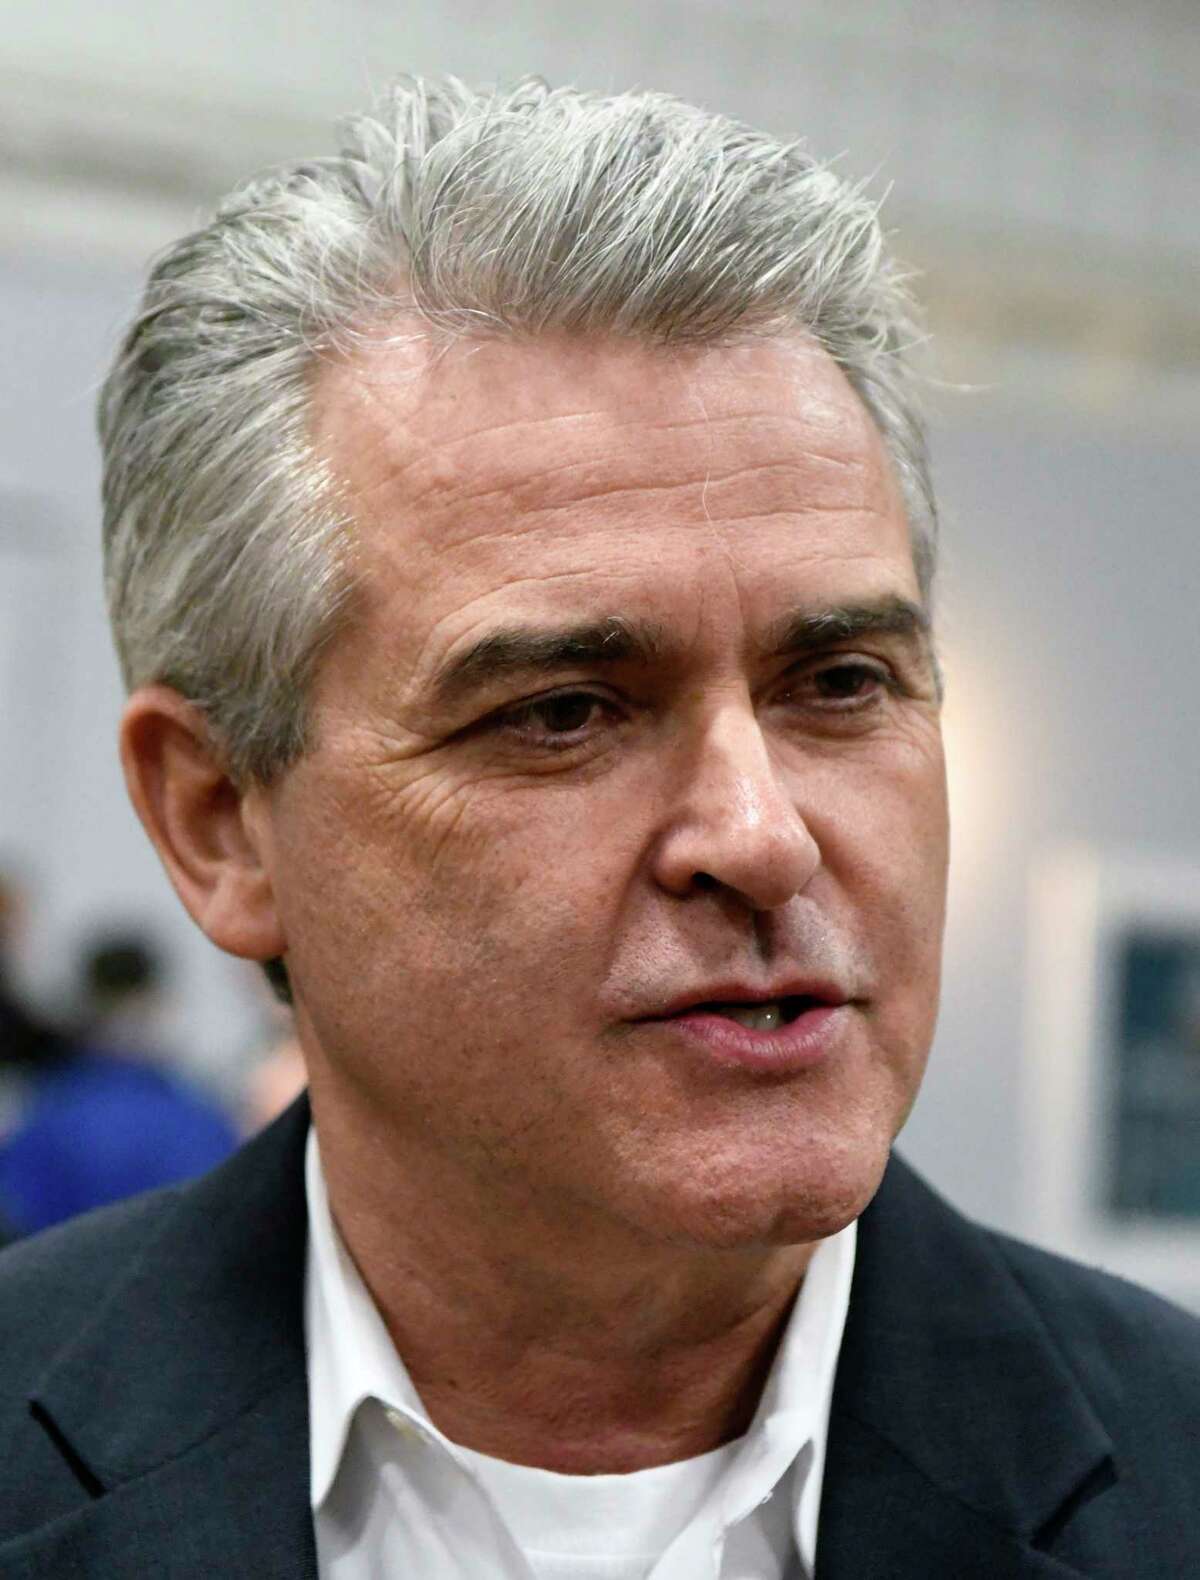 New York Assemblyman Steve McLaughlin (R,C,I-Troy) talks with reporters after Mayor, David Borge postponed a meeting where officials were to consider a settlement at the Hoosick Falls Armory concerning a settlement agreement between the village of Hoosick Falls and Saint-Gobain Performance Plastics and Honeywell of the handling of PFOA contamination in the villages drinking water in Hoosick Falls, N.Y., on Thursday, Feb. 23, 2017, (Hans Pennink / Special to the Times Union)